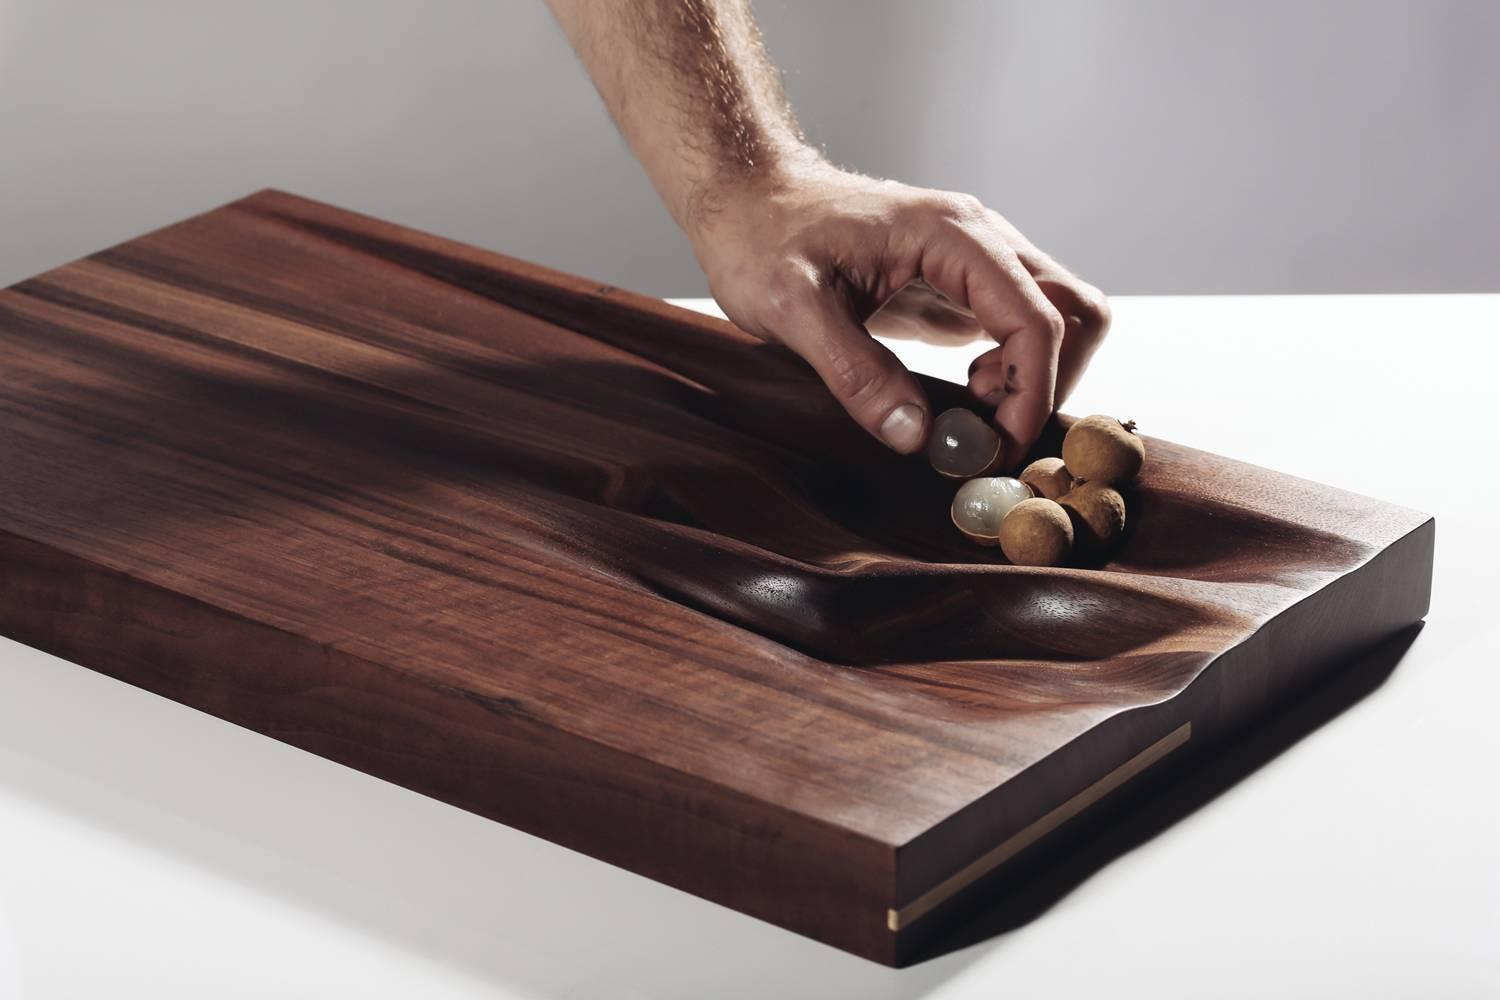 Contemporary natural cutting board by Vincent Pocsik.

Carved walnut cutting board with natural finish. 

Natural food safe oil and wax finish. 

Vincent Pocsik finds the balance between old and new fabrication techniques working in conjunction to